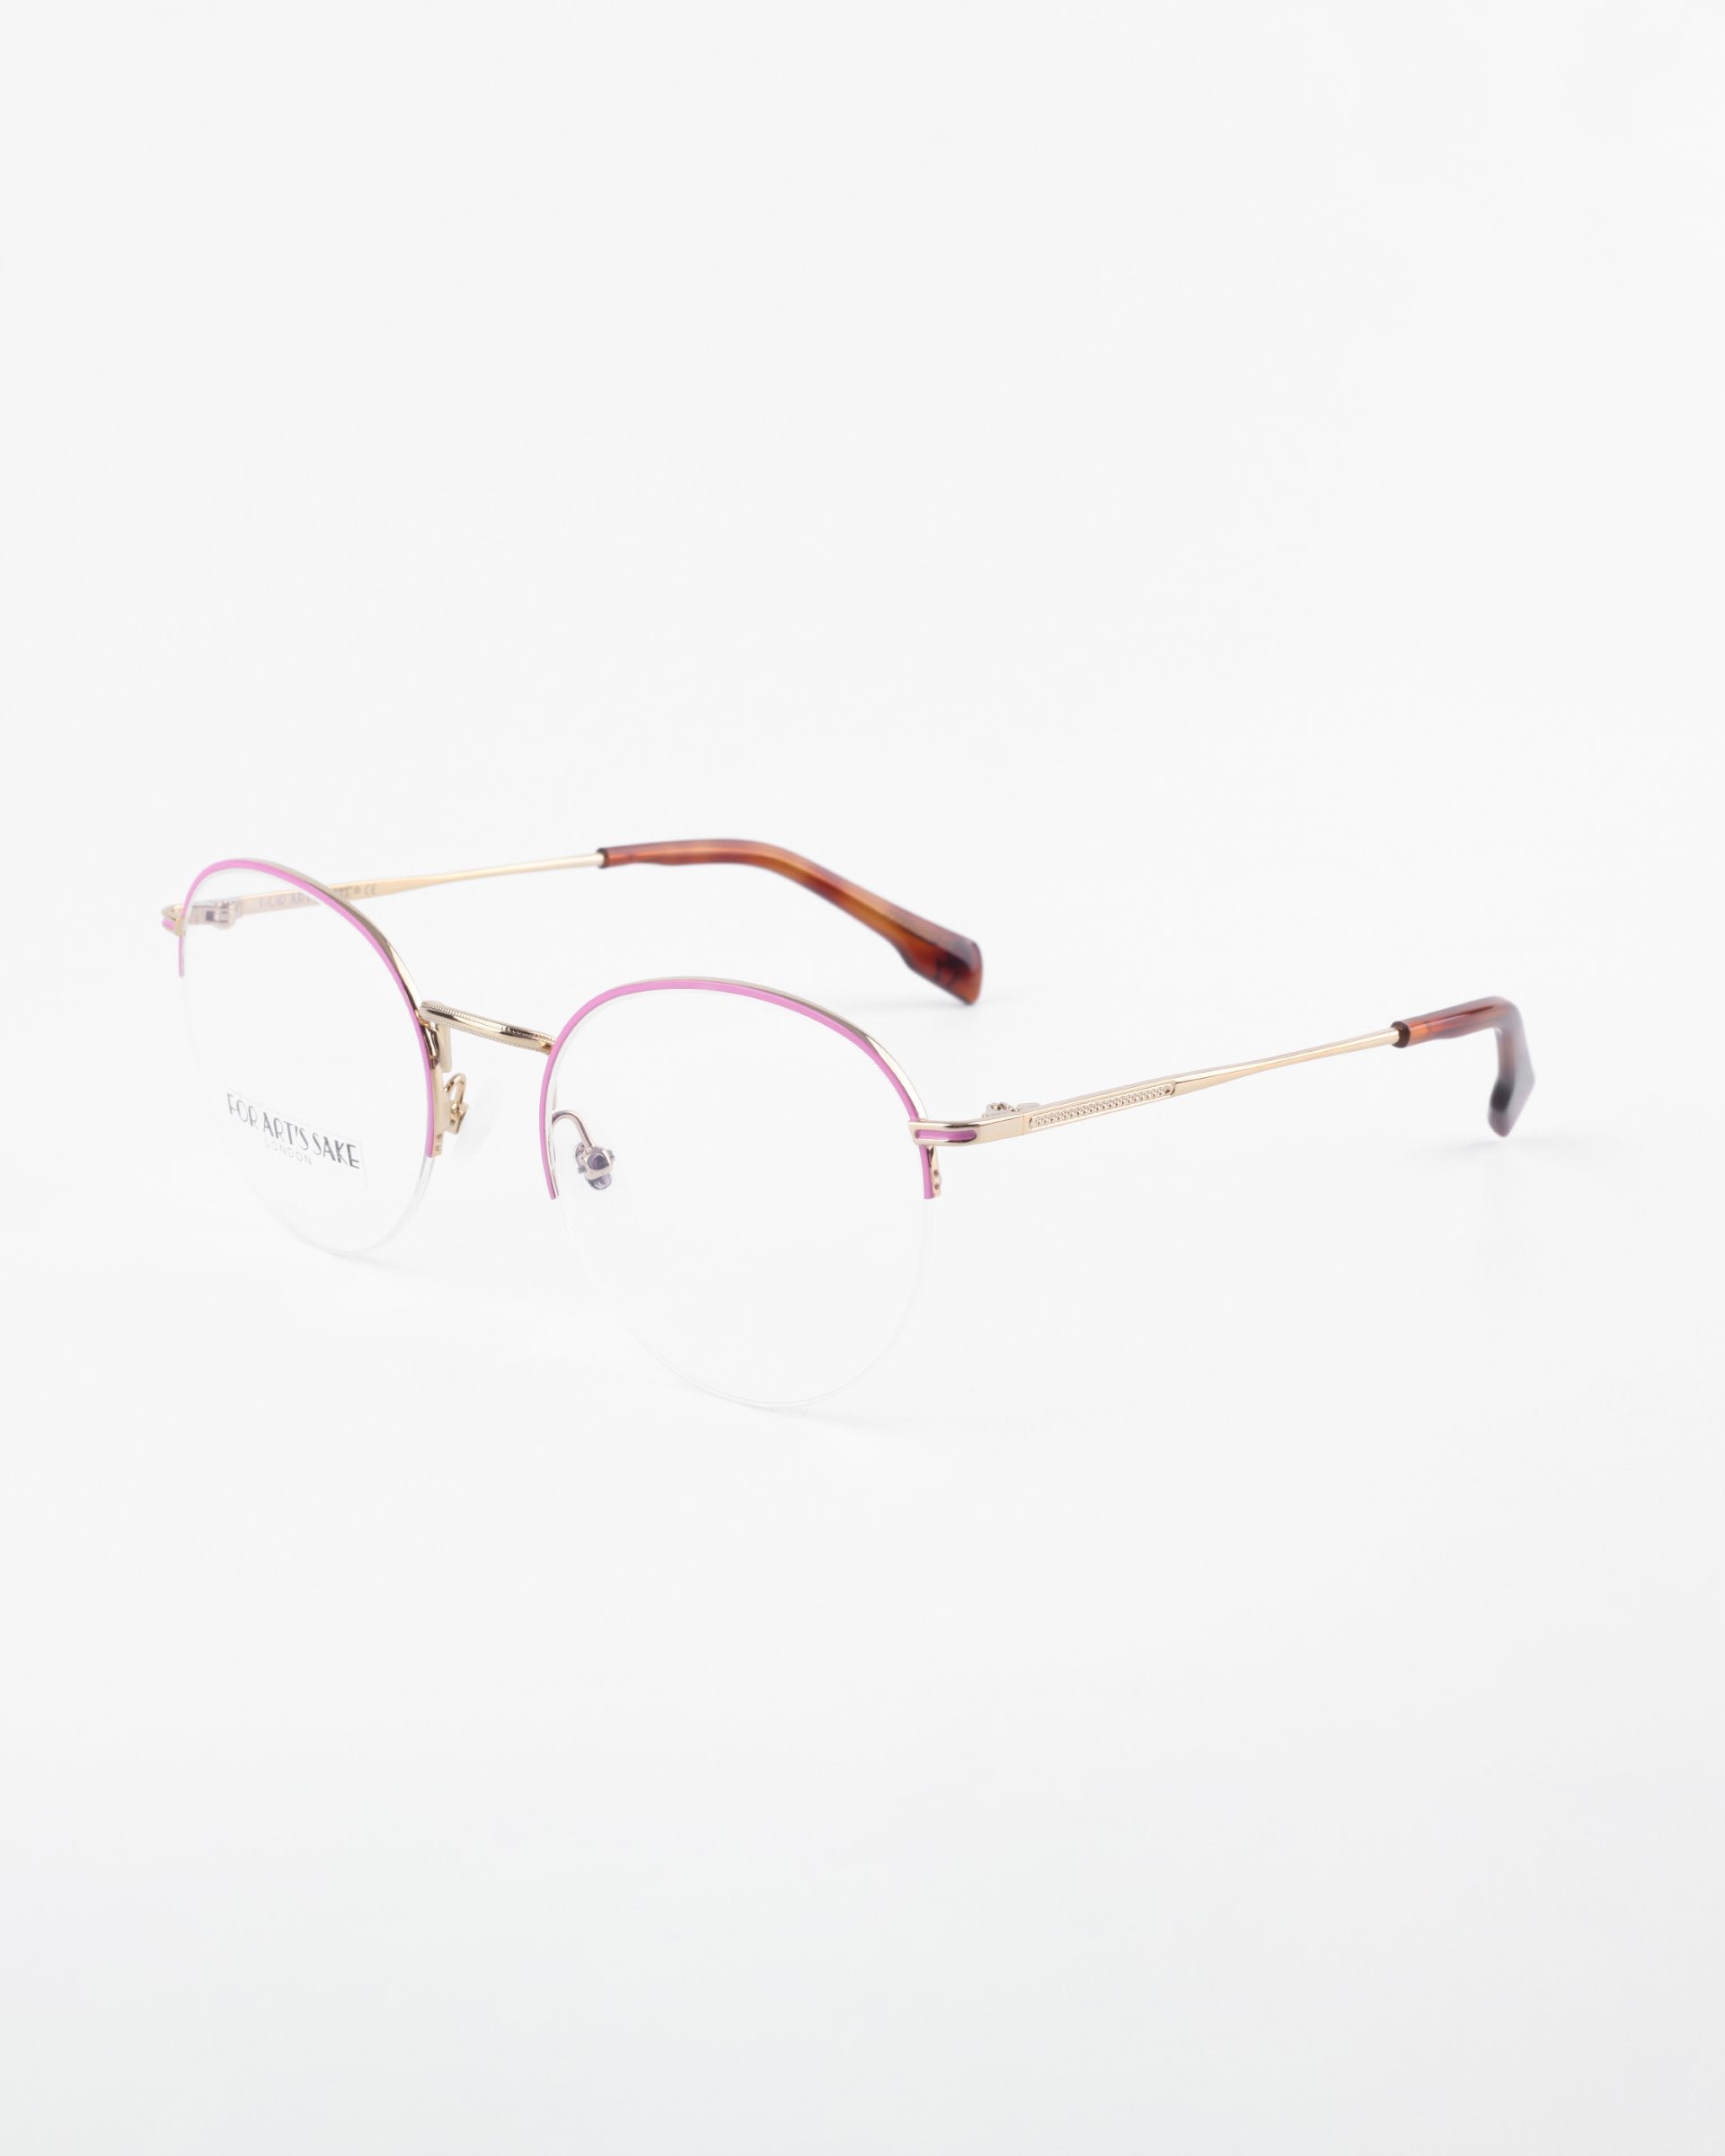 Here is the sentence with the specified product name and brand name:

A pair of For Art&#39;s Sake® Ivy minimalist eyeglasses with thin gold frames and subtly tinted pink upper rims. The temples are gold with brown tips. Featuring clear prescription lenses with a blue light filter, the overall design is sleek and modern against a plain white background.